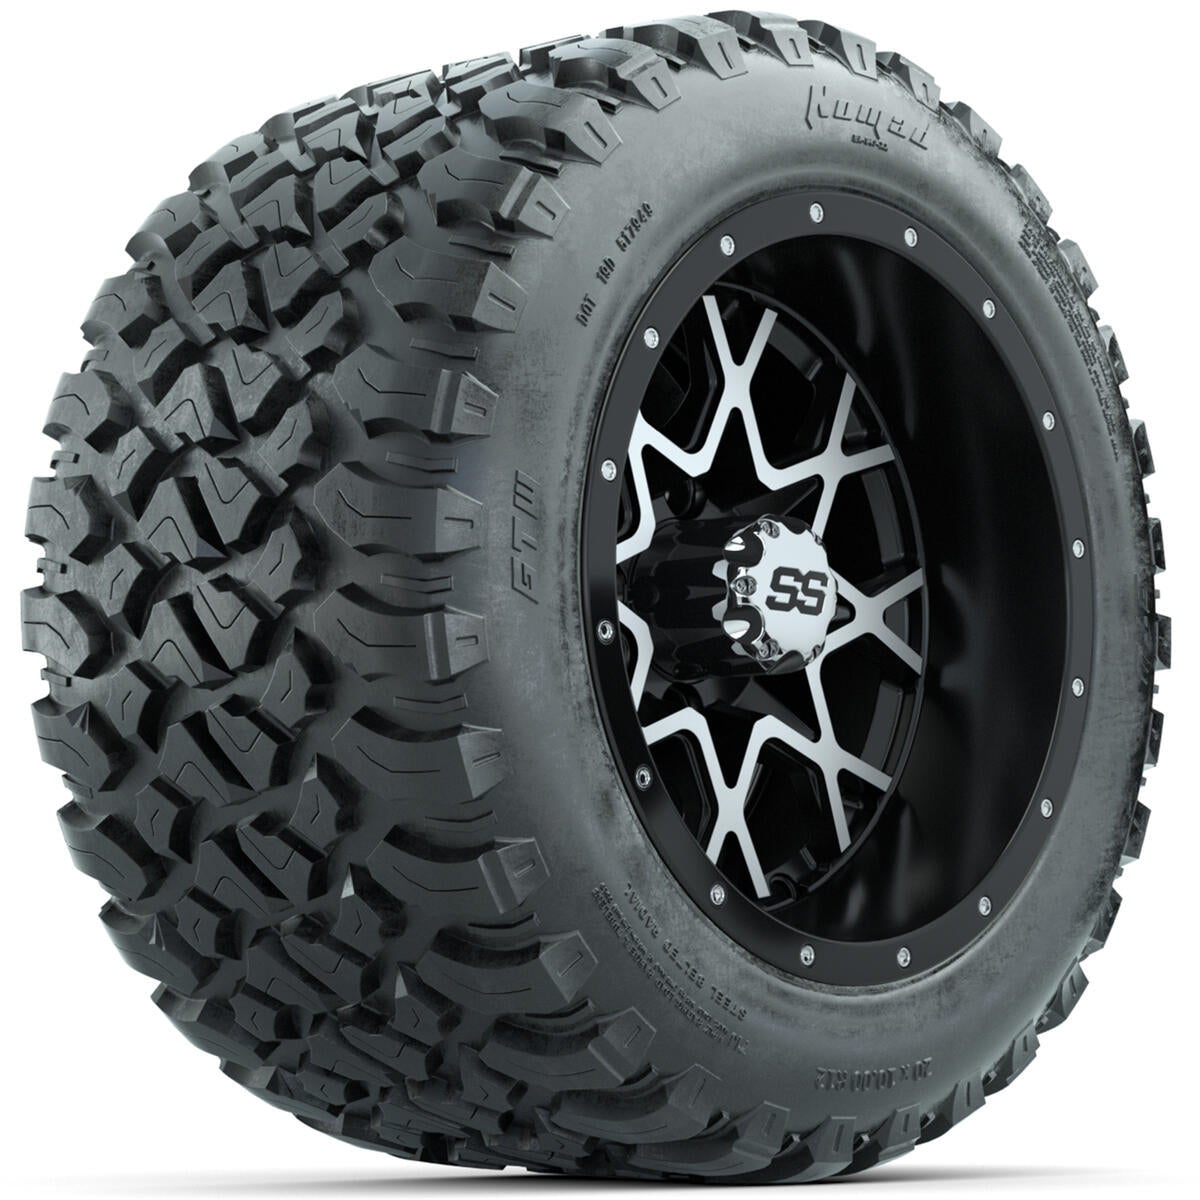 Set of 4 12"in GTW Vortex Wheels with 20x10-R12"GTW Nomad All-Terrain Tires A19-649